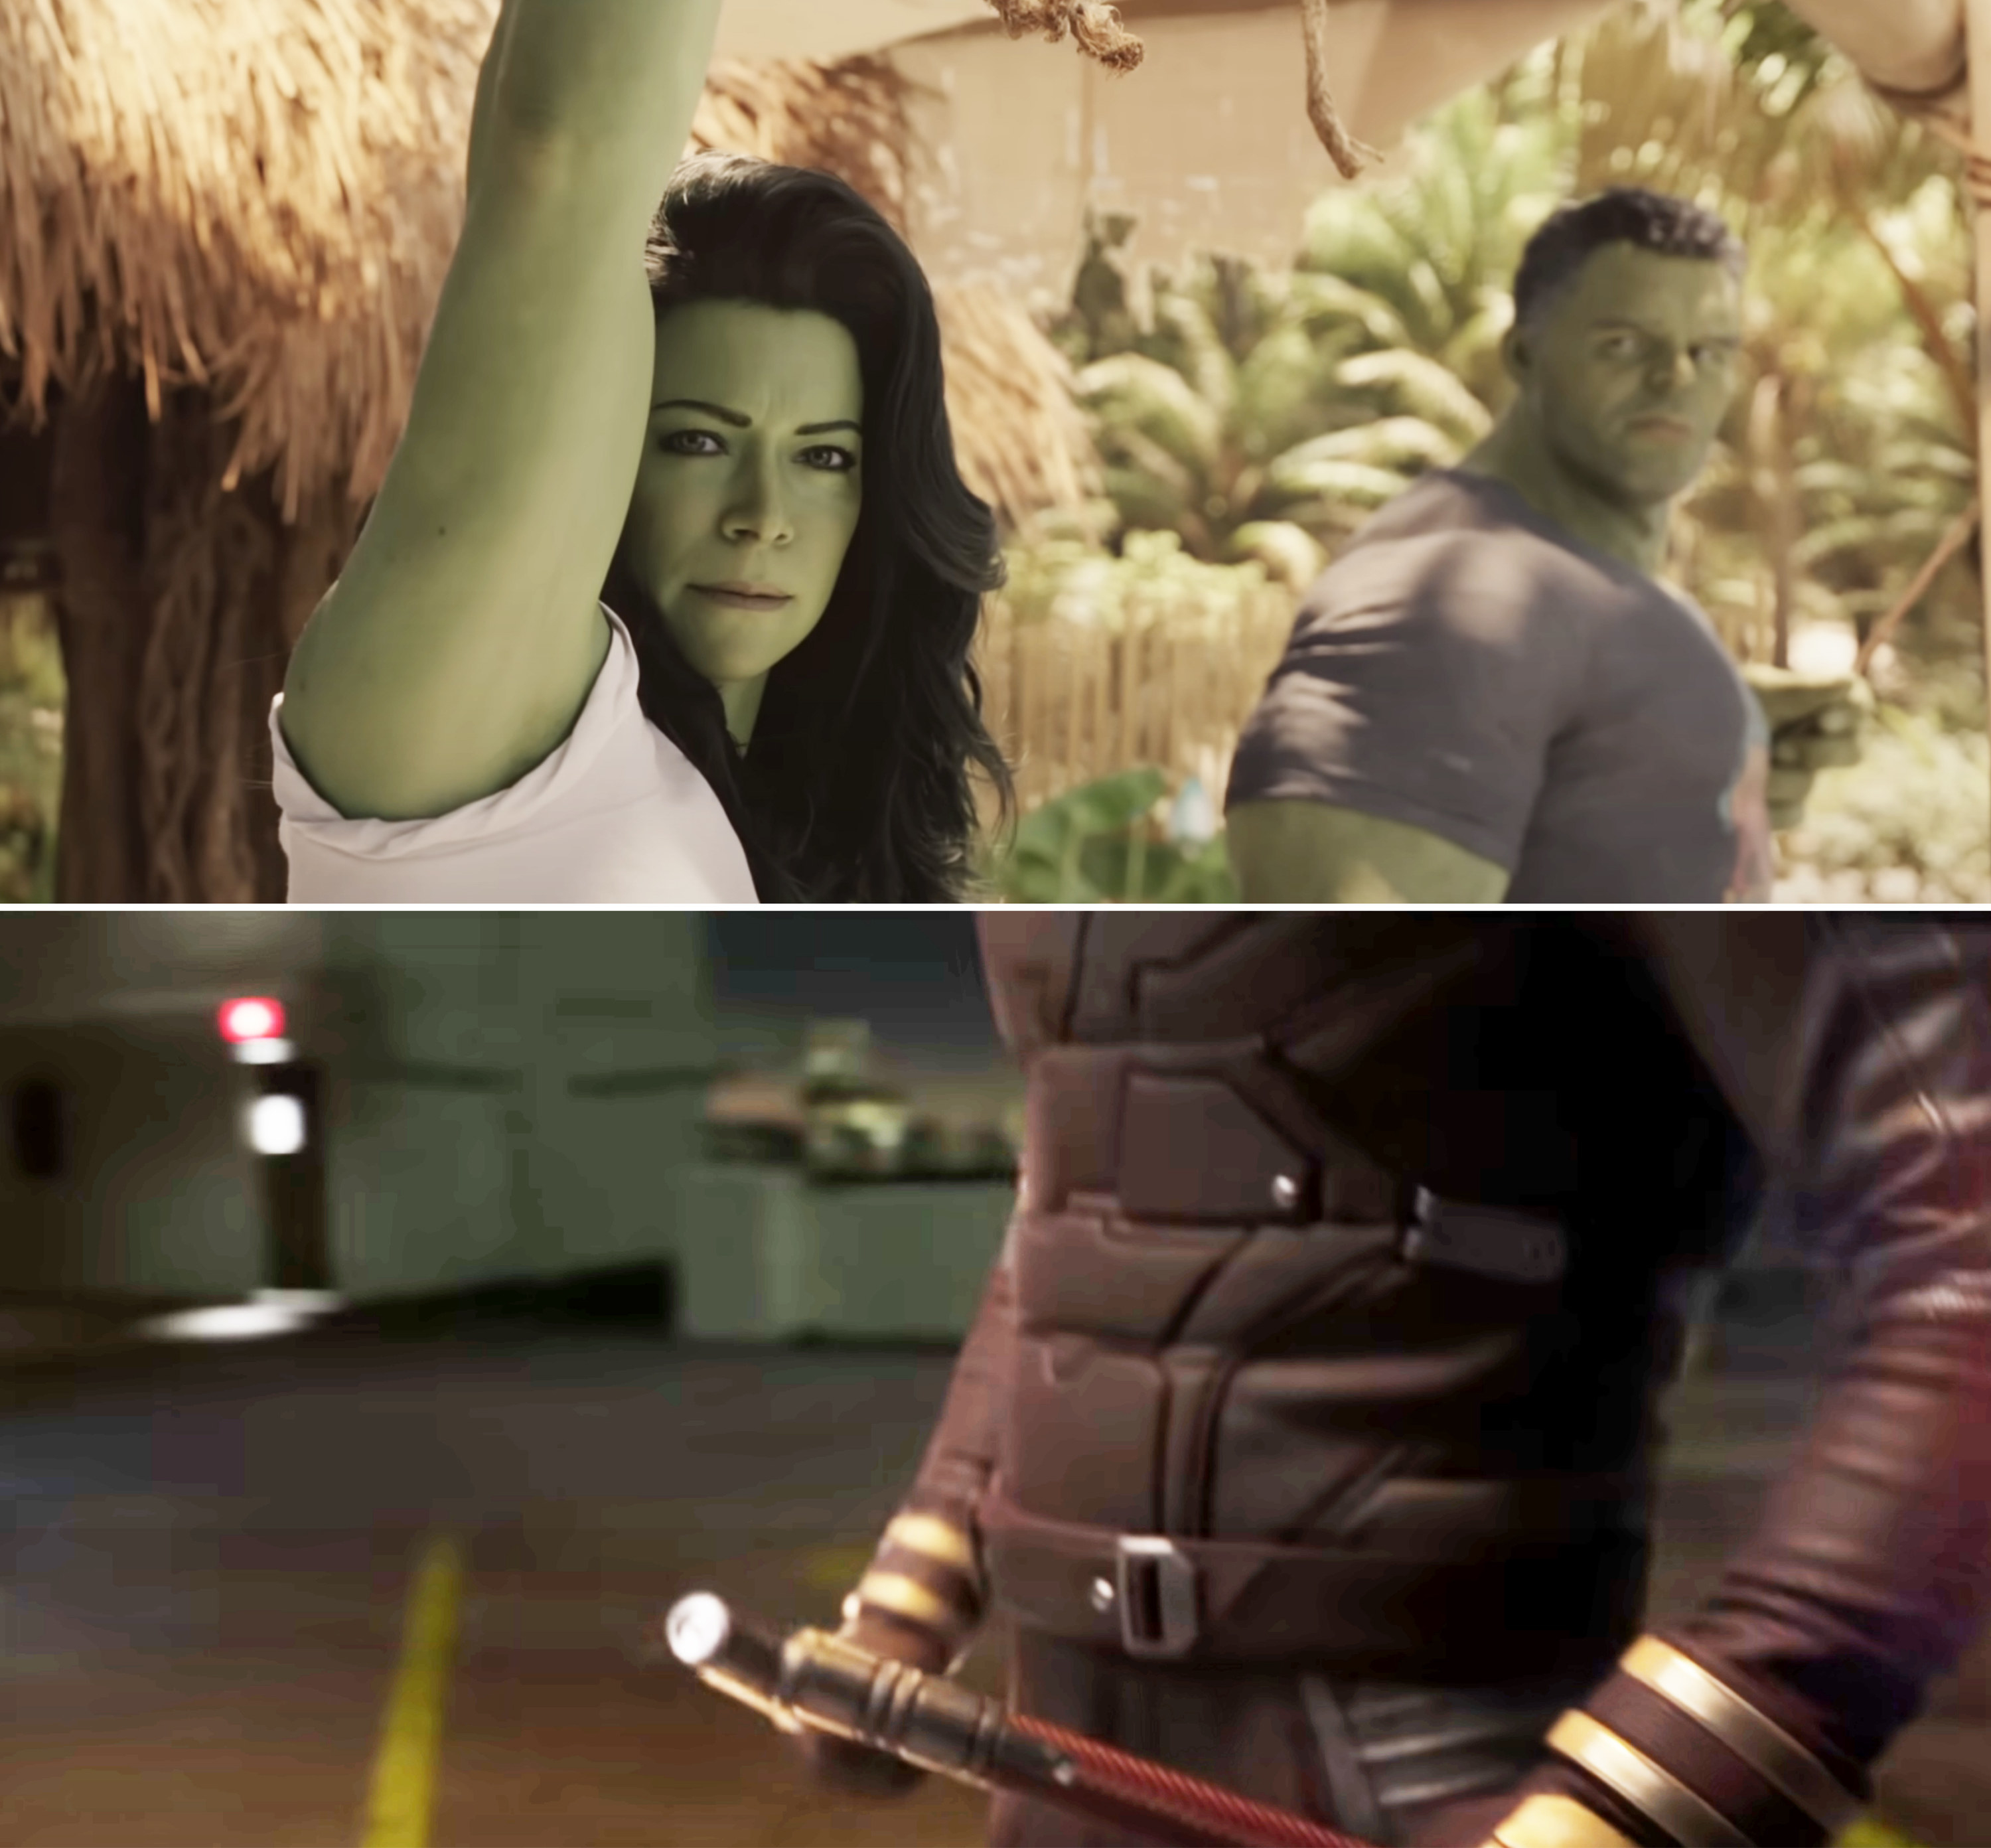 Two stills from the show, one of Mark Ruffalo making a cameo as Hulk, and the other shows Daredevil&#x27;s iconic costume, though the person wearing it is not clear